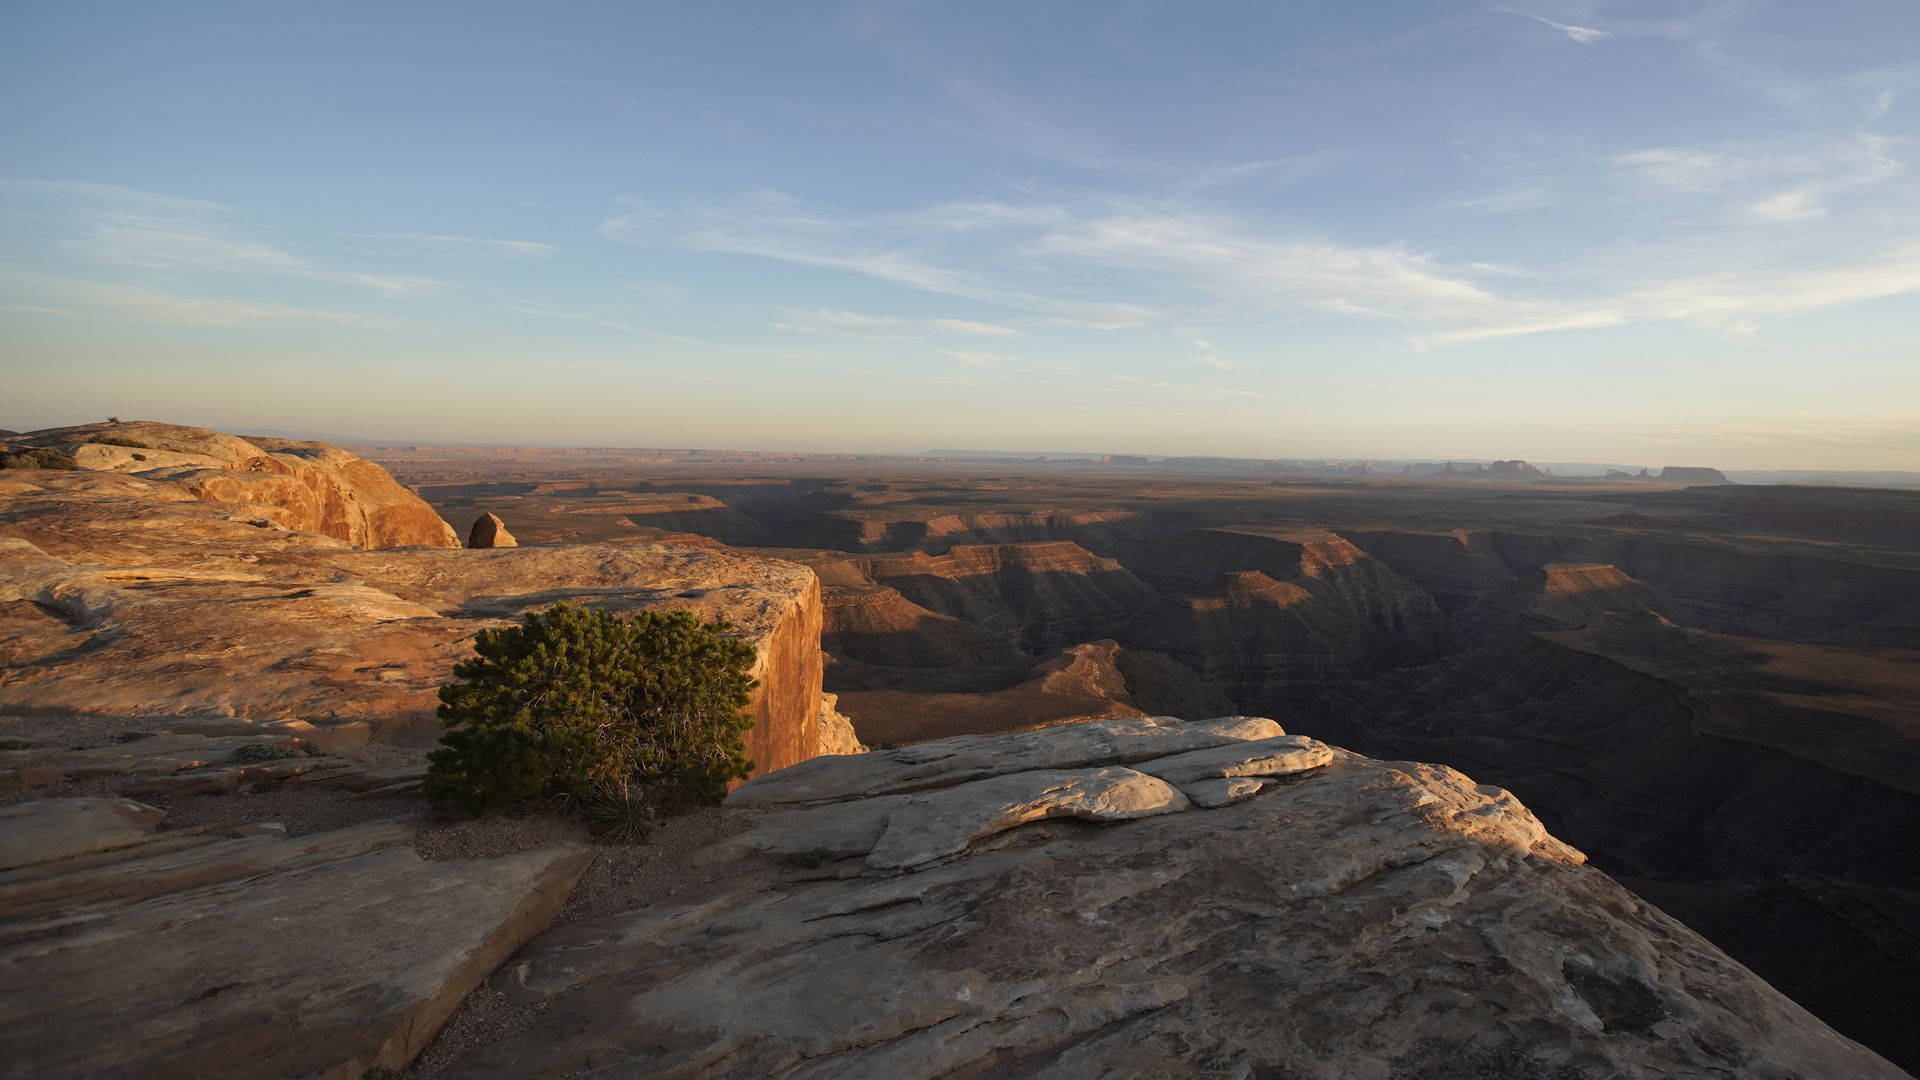 The sun sets over Monument Valley in the distance as seen from the Bears Ears National Monument.